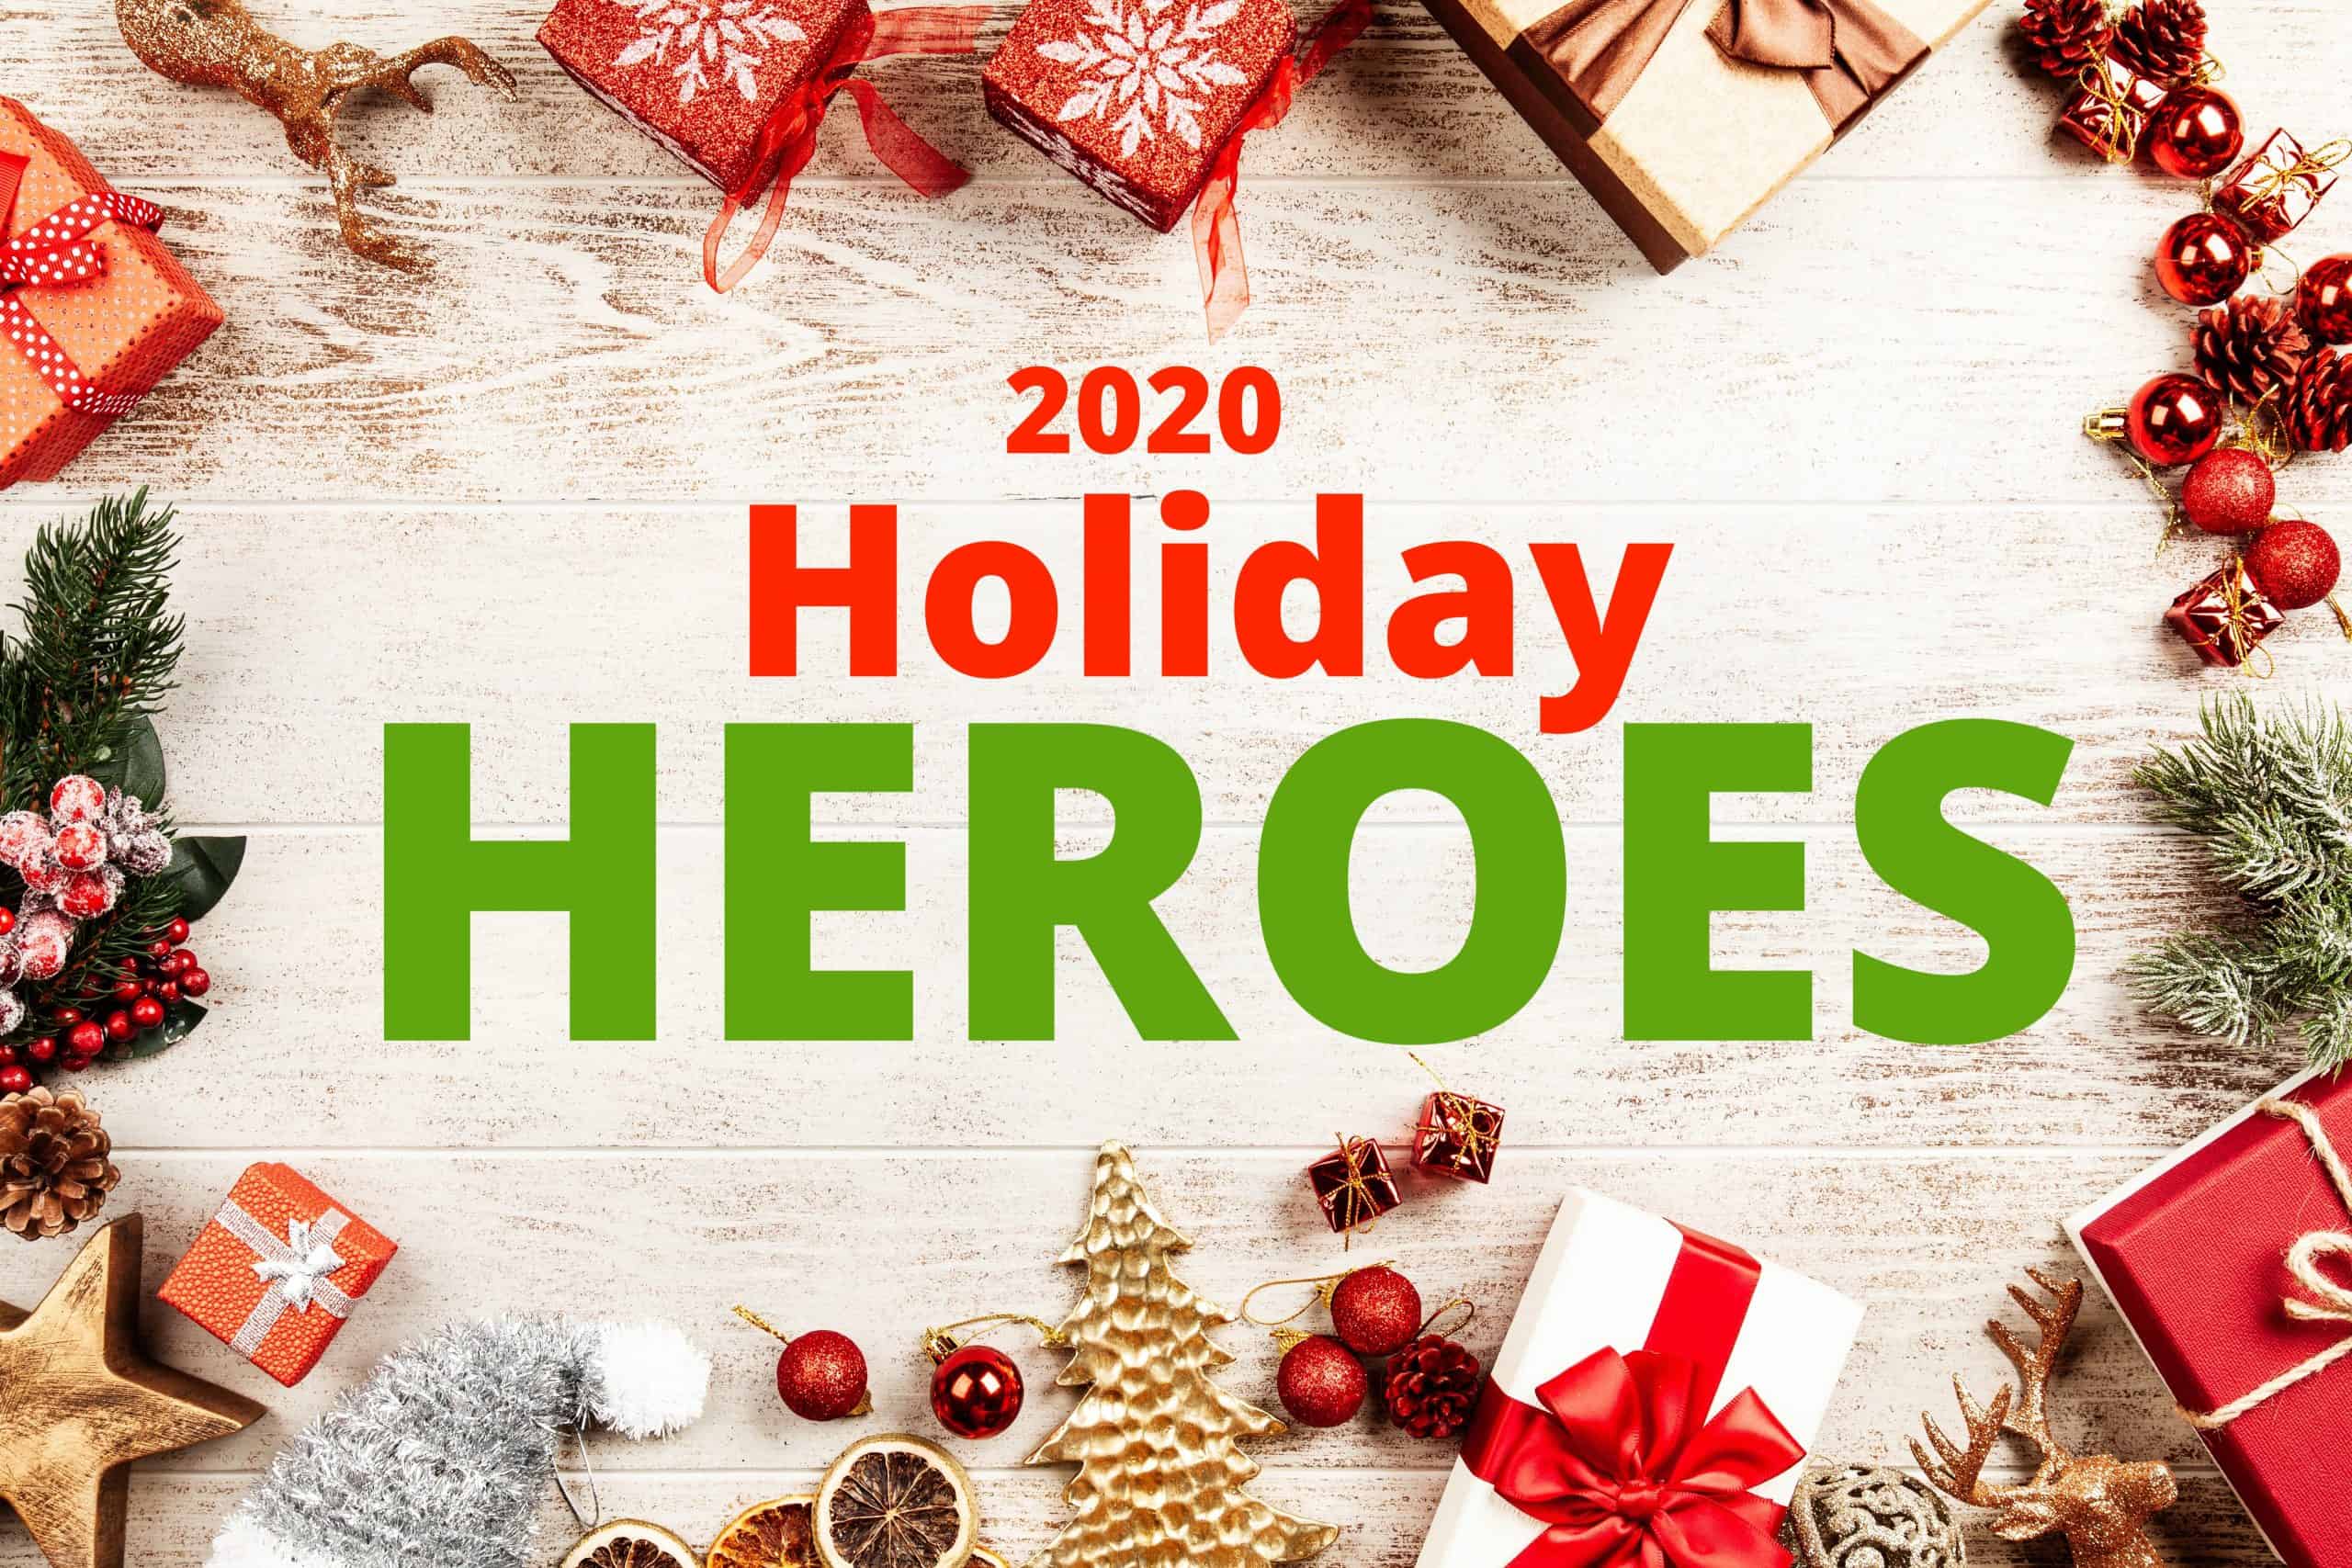 Celebrating our holiday heroes this winter